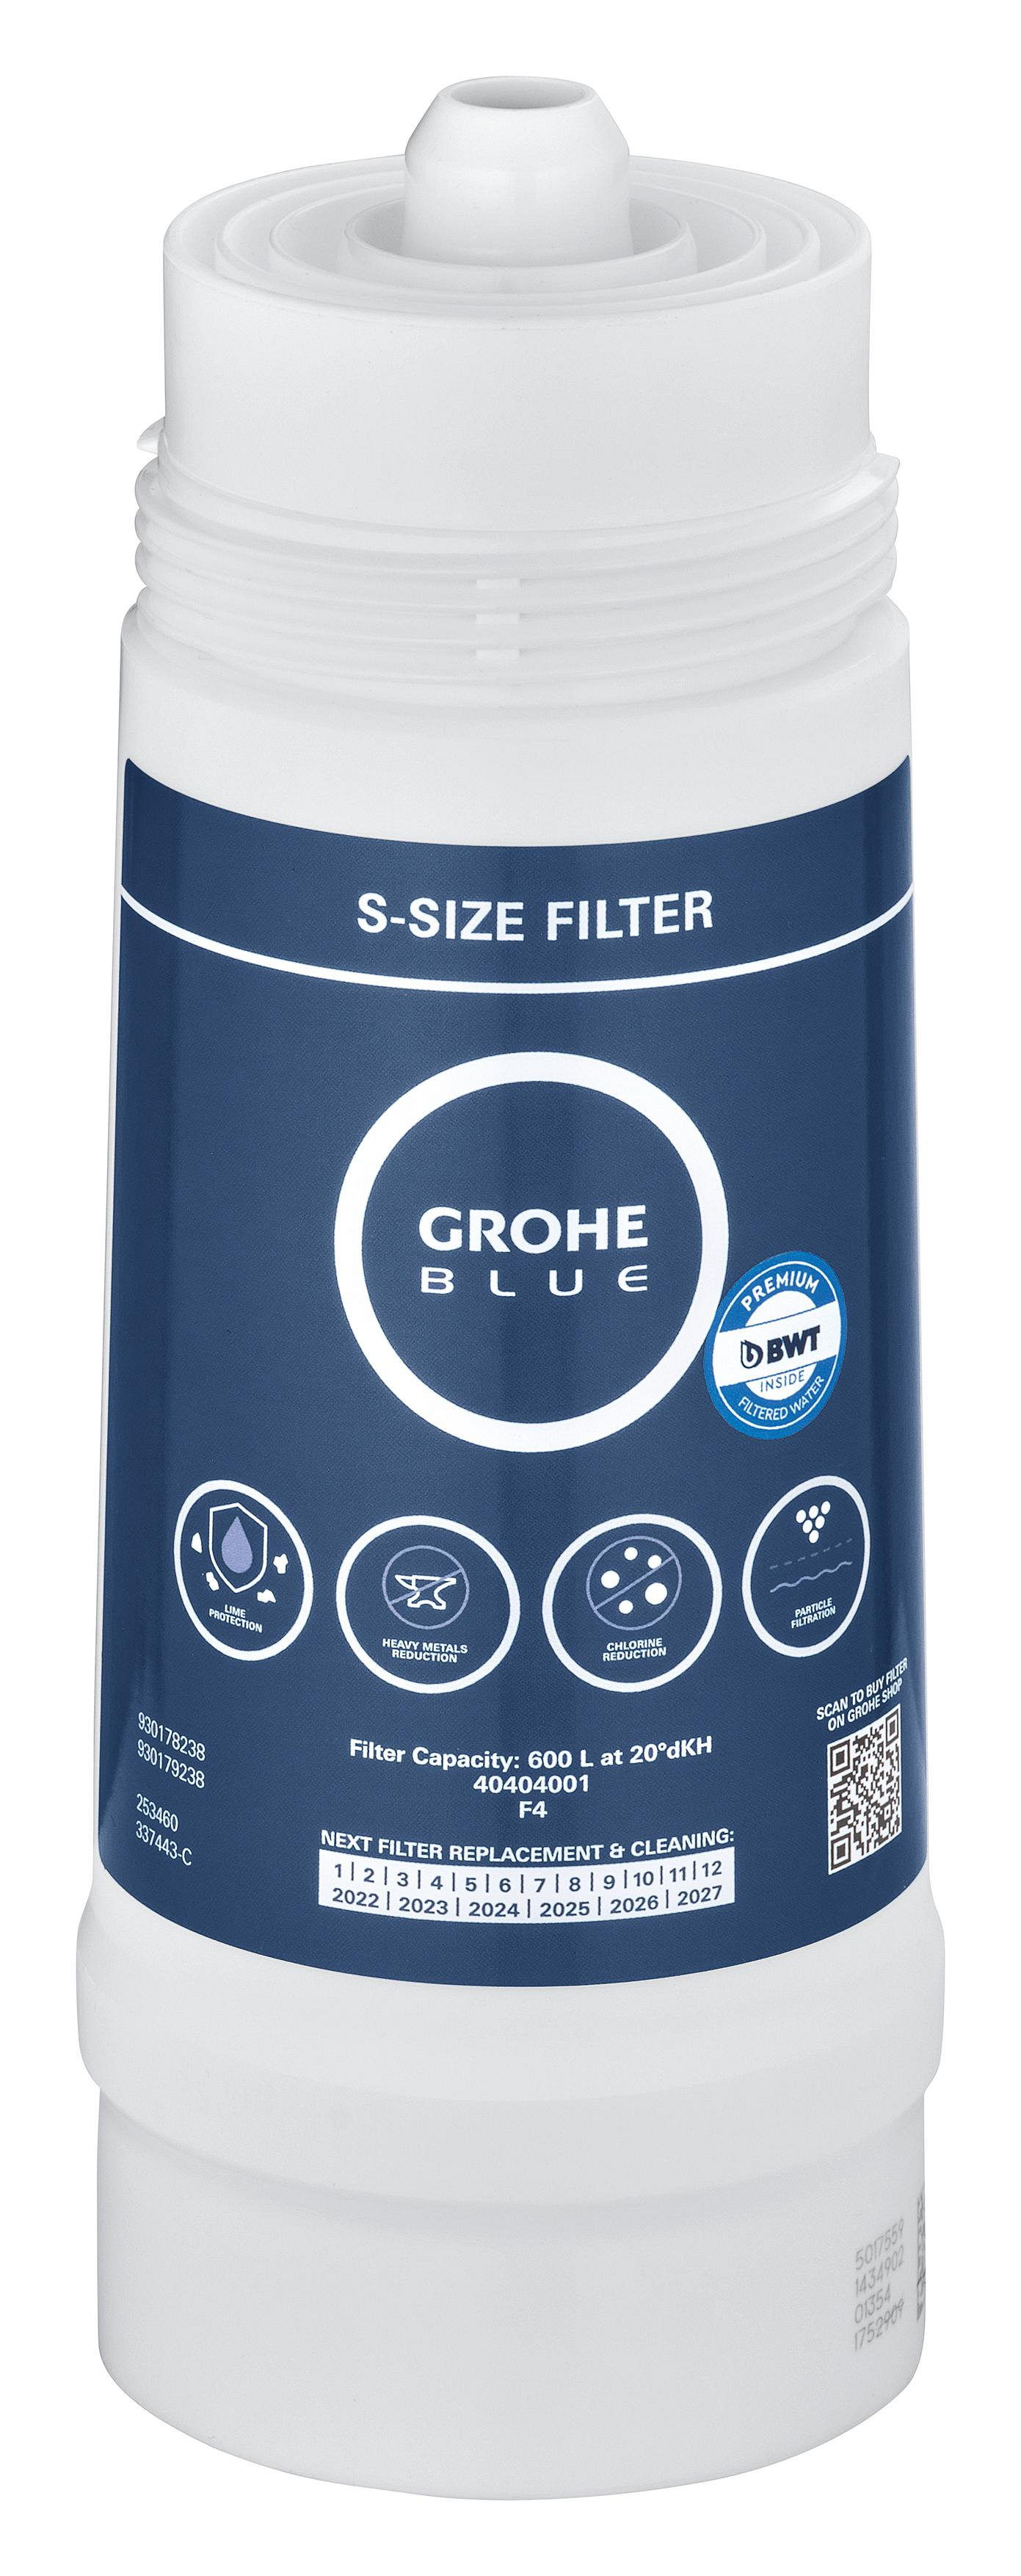 GROHE Blue Filter S-Size 600L